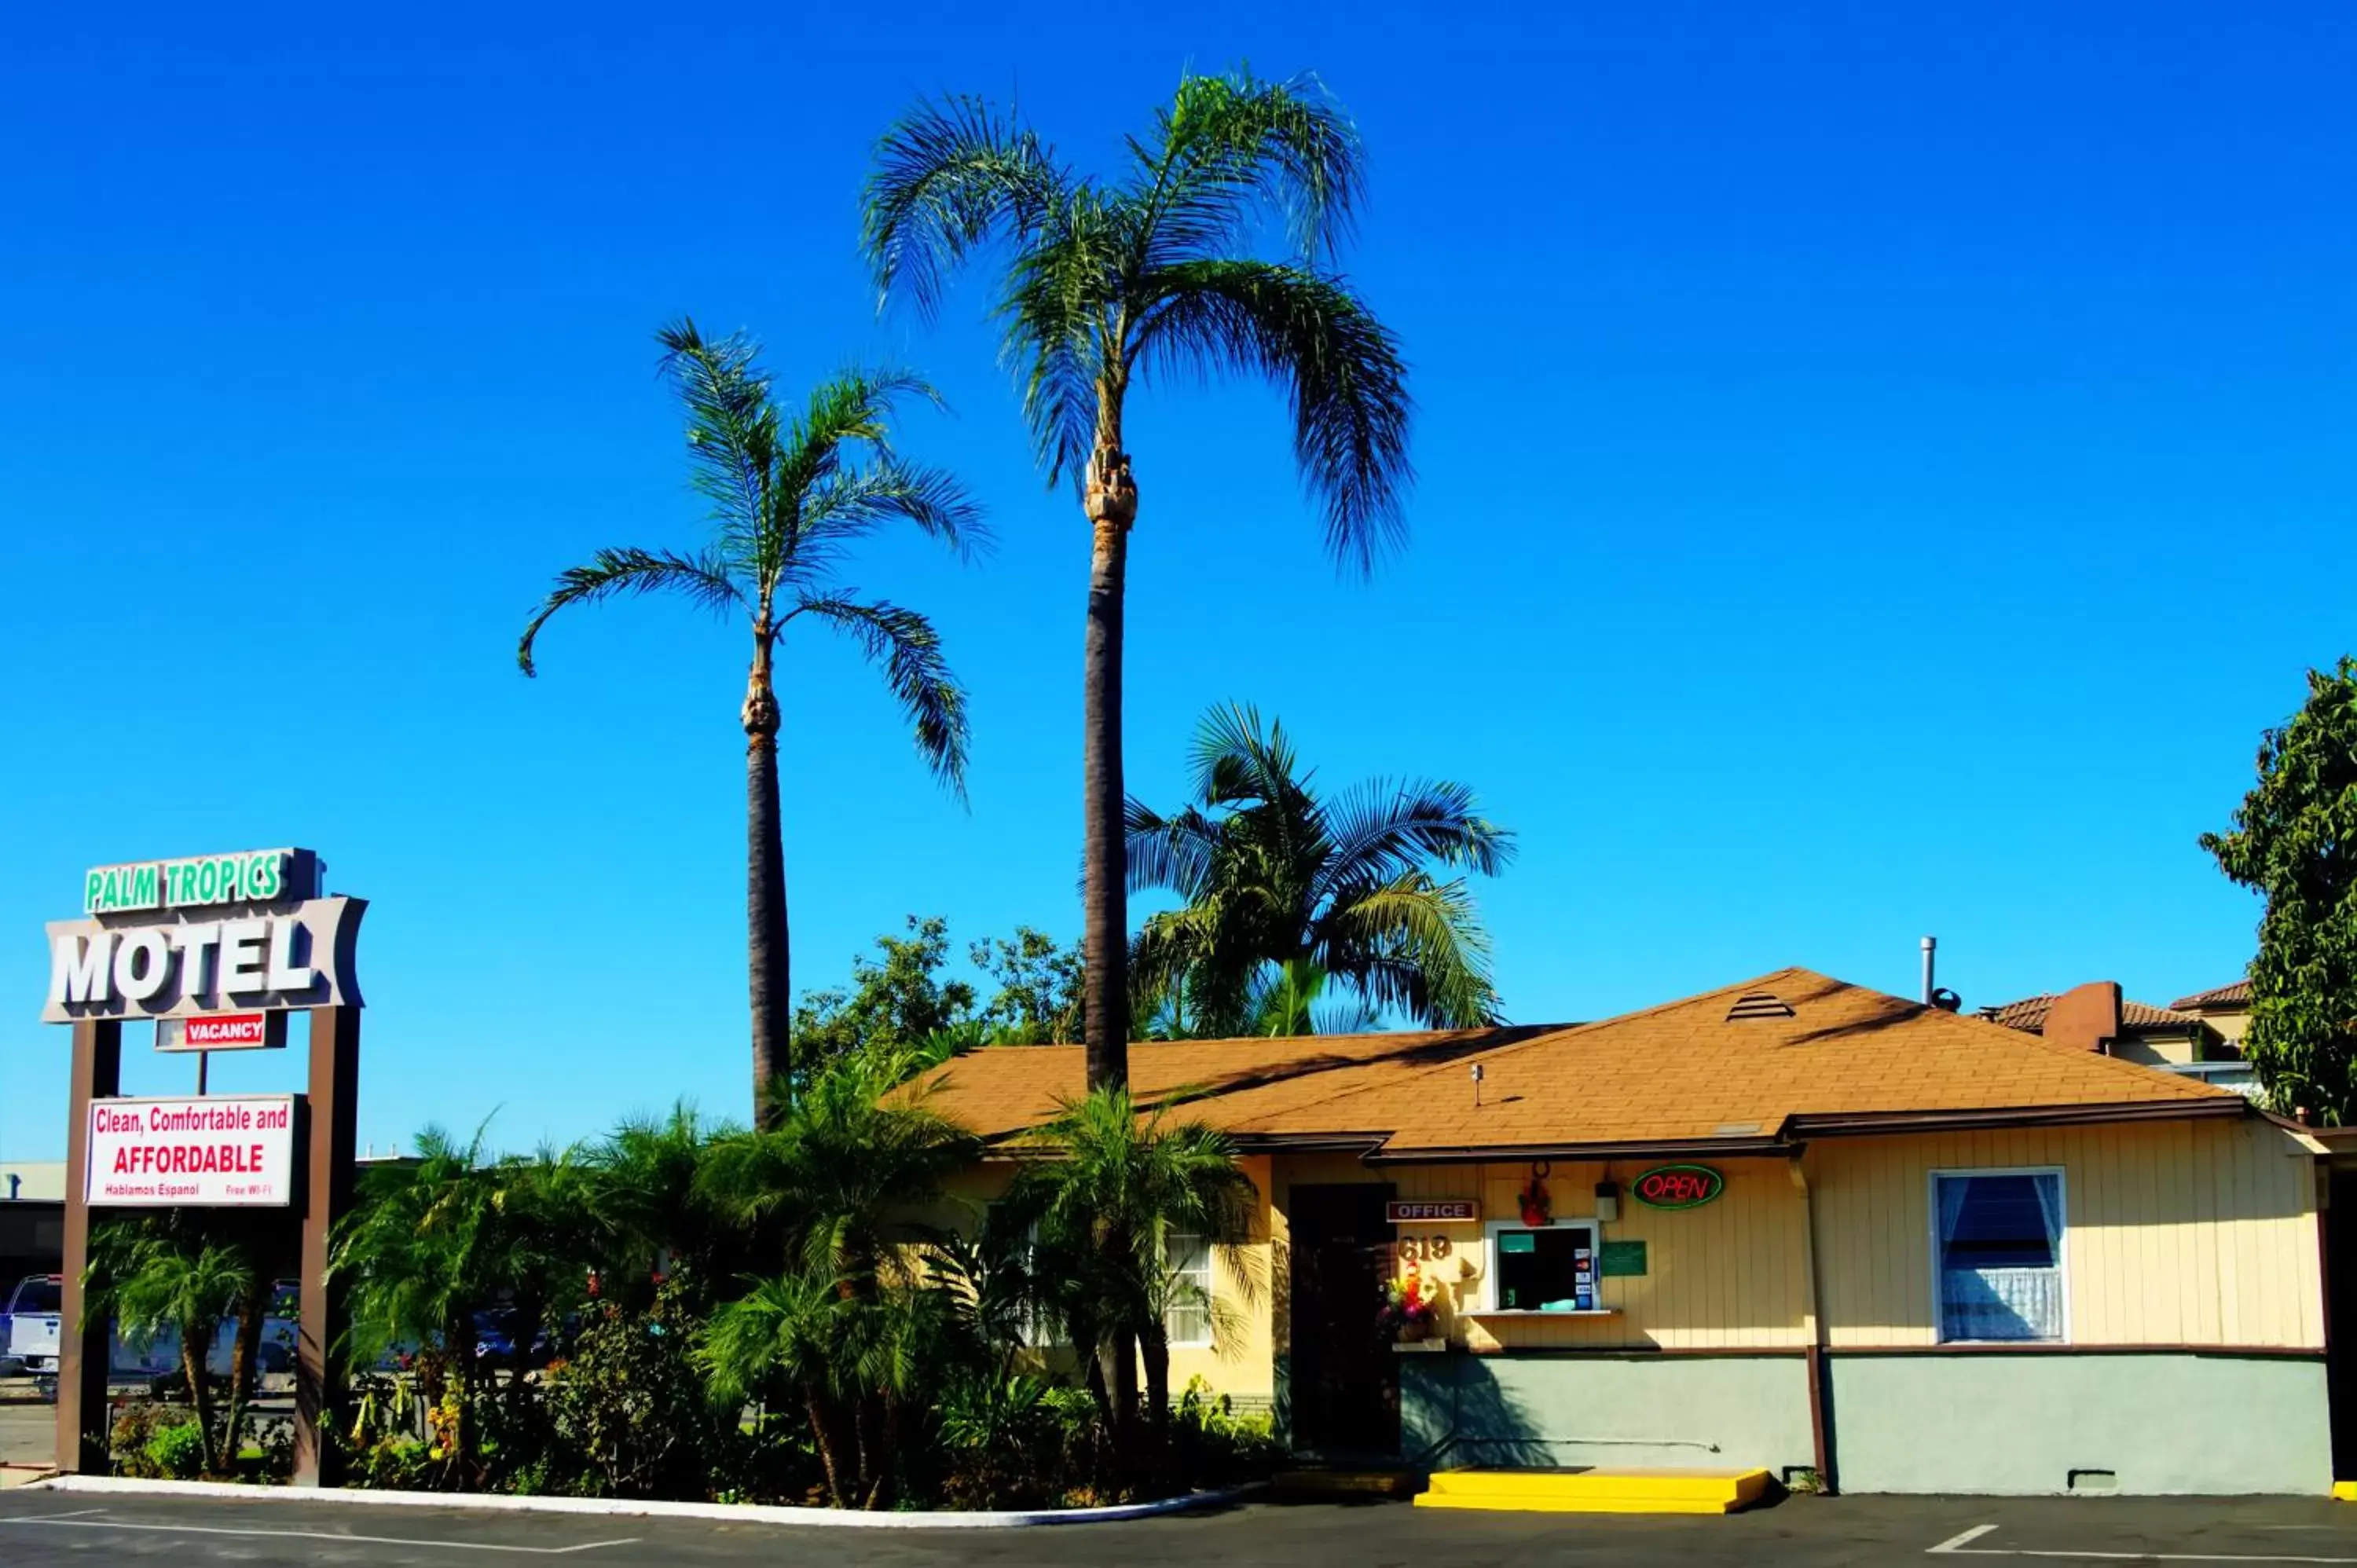 Property Building in Palm Tropics Motel